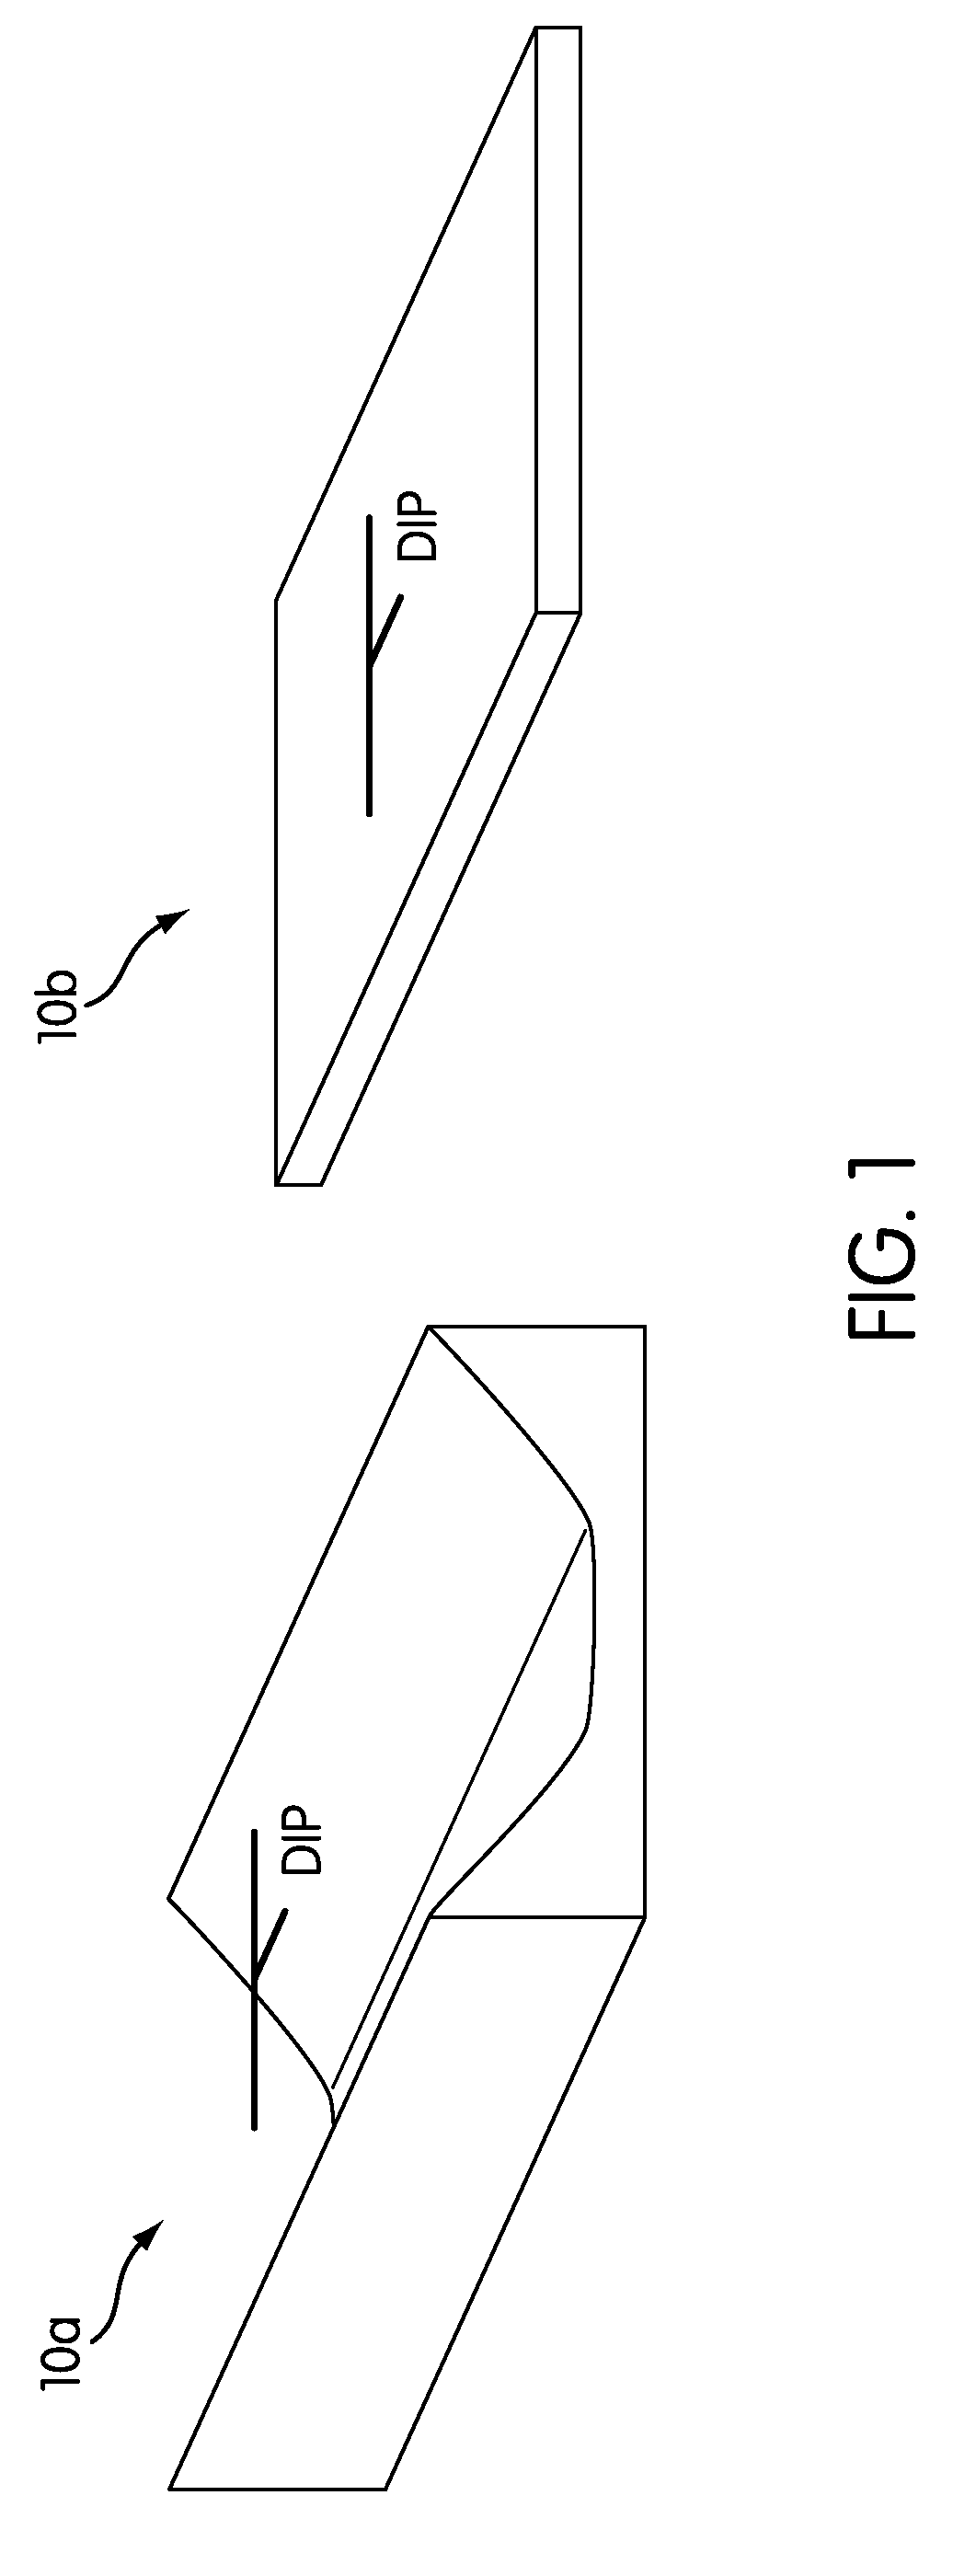 System and method for modeling flow events responsible for the formation of a geological reservoir